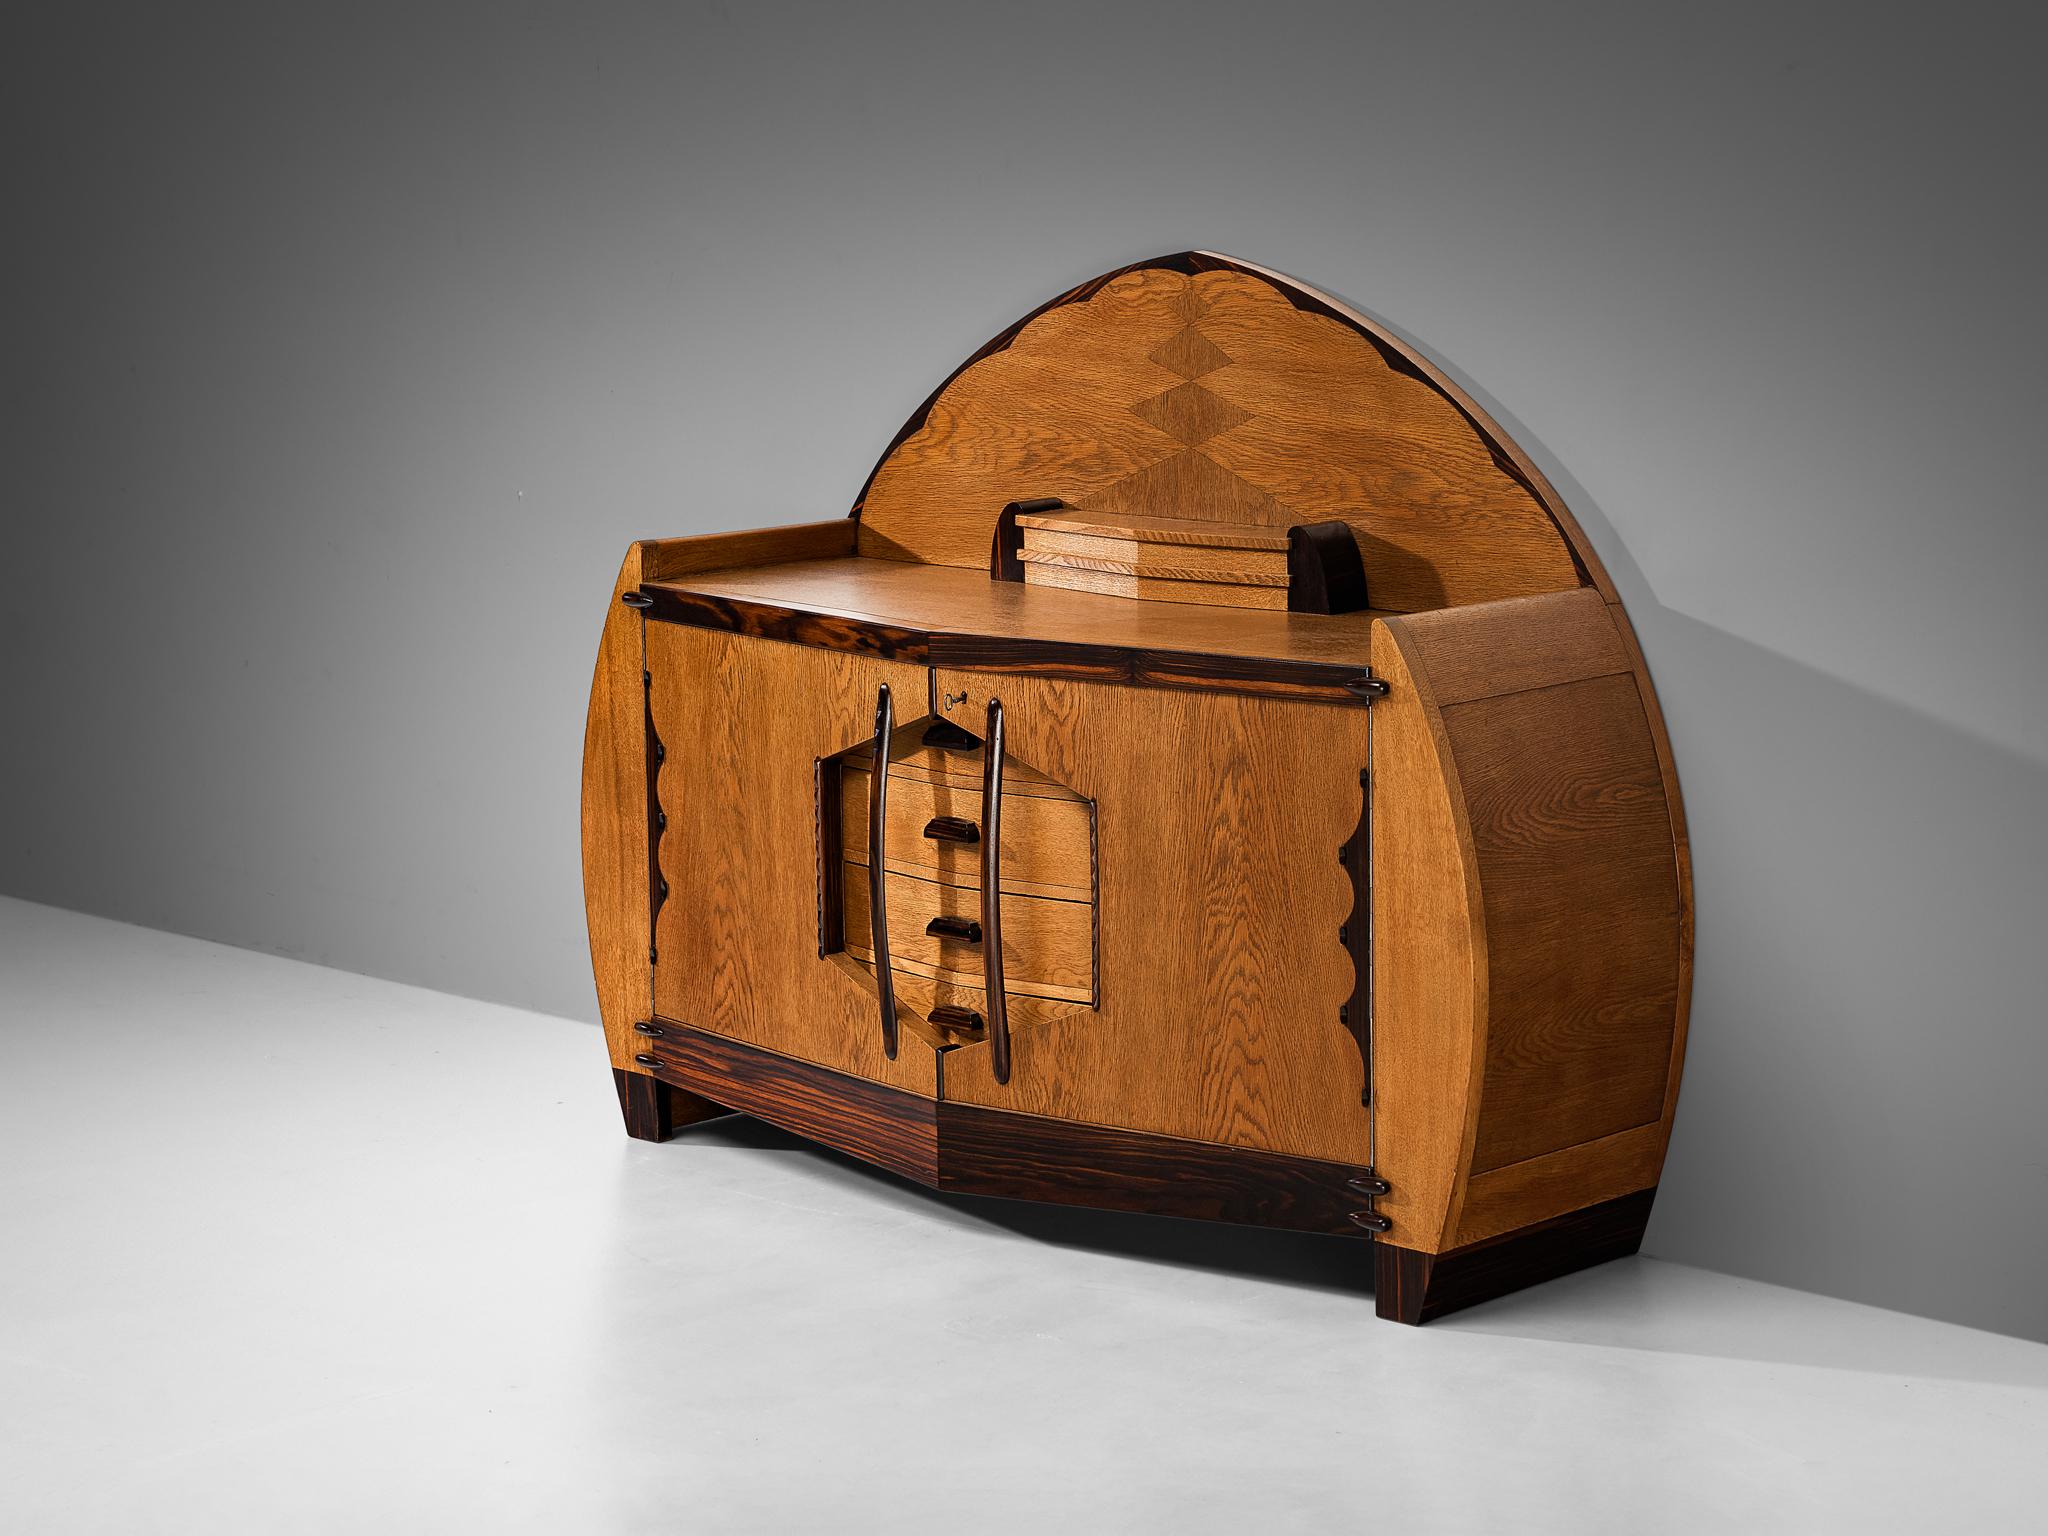 L.J. Verweij for Intima, sideboard, oak, coromandel, The Netherlands, 1920s

This extremely rare cabinet is designed by Dutch designer L.J. Verweij for Intima in the 1920s. Although little has been known about this creator, this design truly